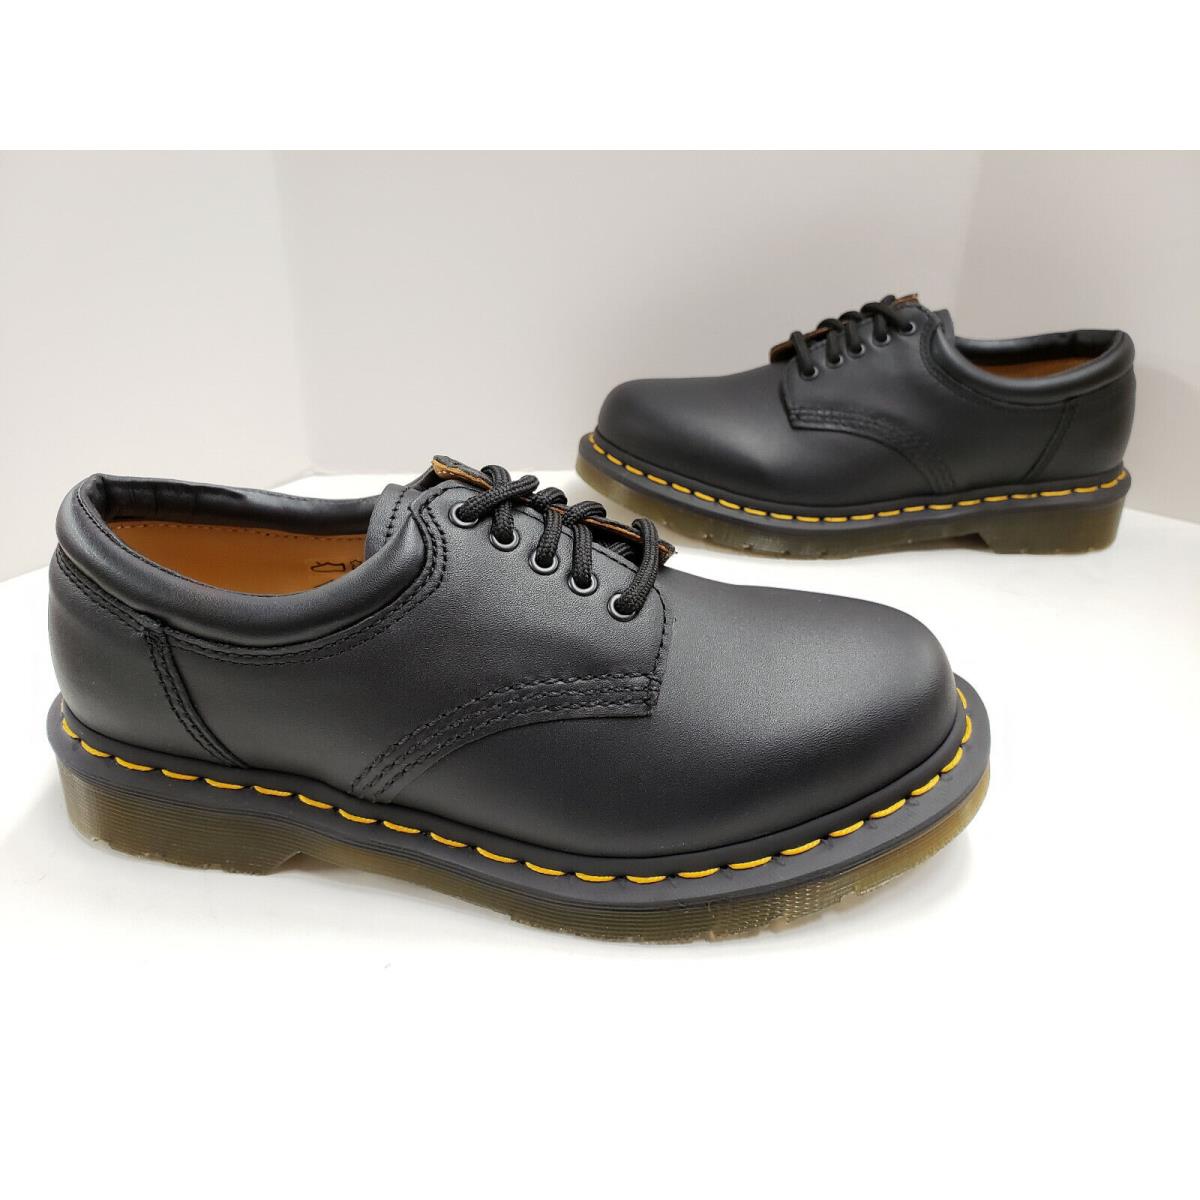 Dr Martens 5 Eyelet 8053 Lace-up Shoes Black Nappa Leather 11849001